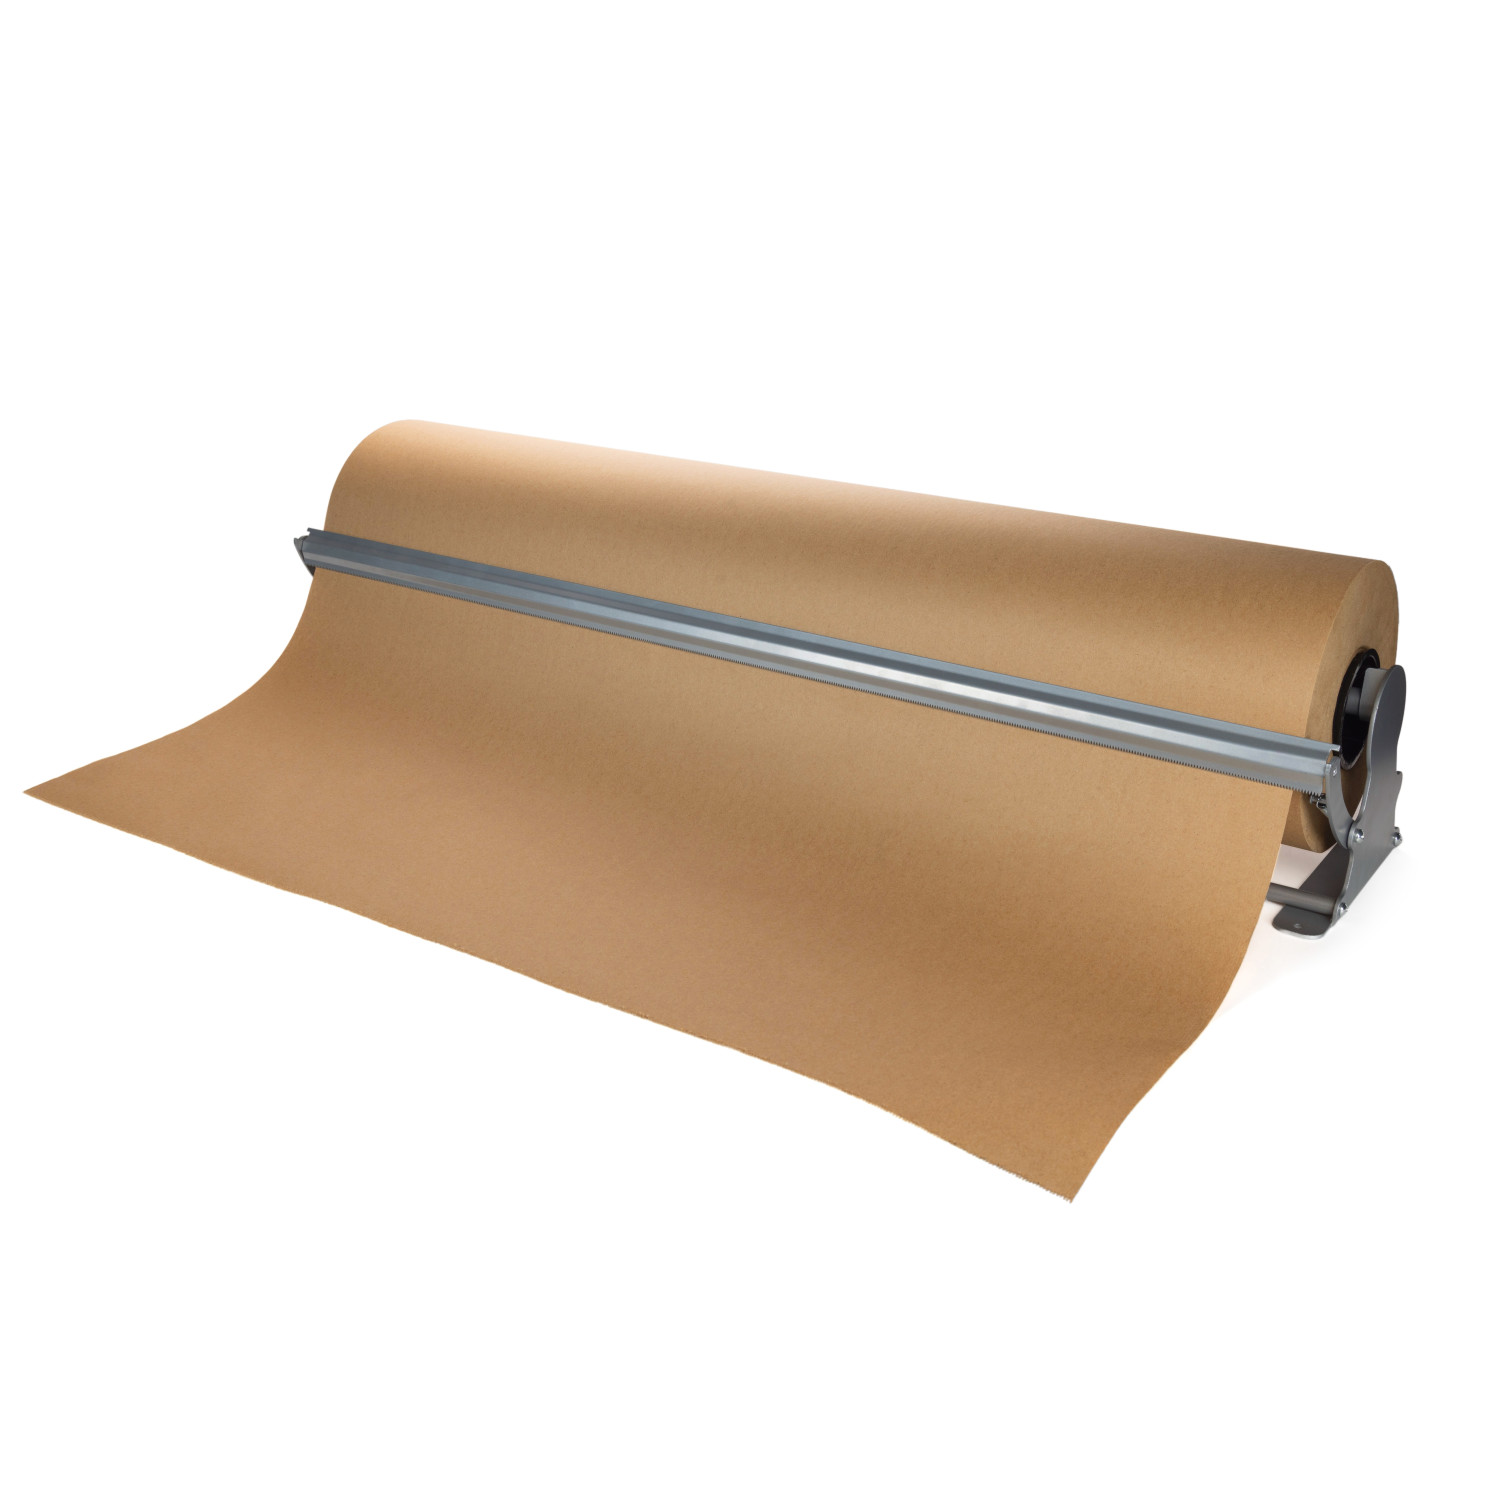 PD-RD36 Kraft Paper Roll Dispenser & Cutter for Rolls up to 36 Wide and 9  in Diameter buy in stock in U.S. in IDL Packaging